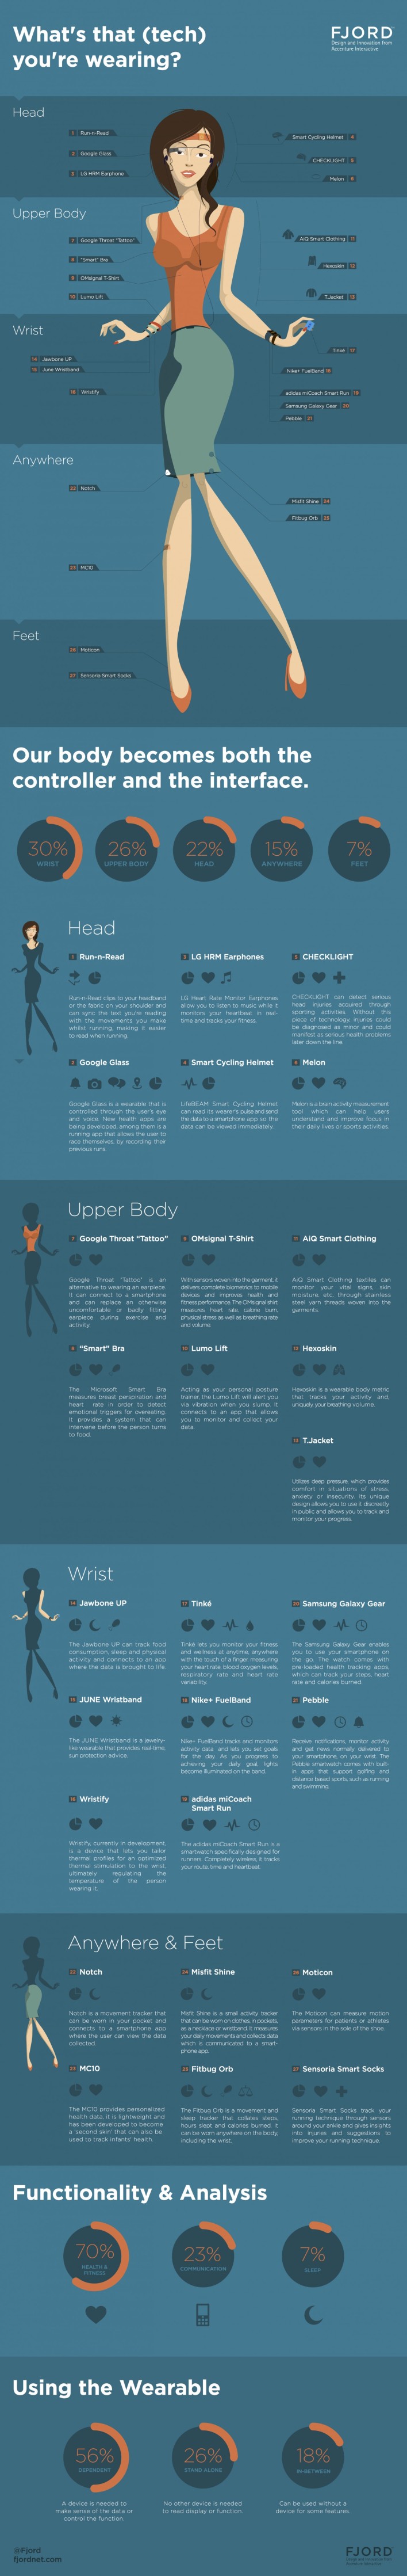 infographic wearable technology